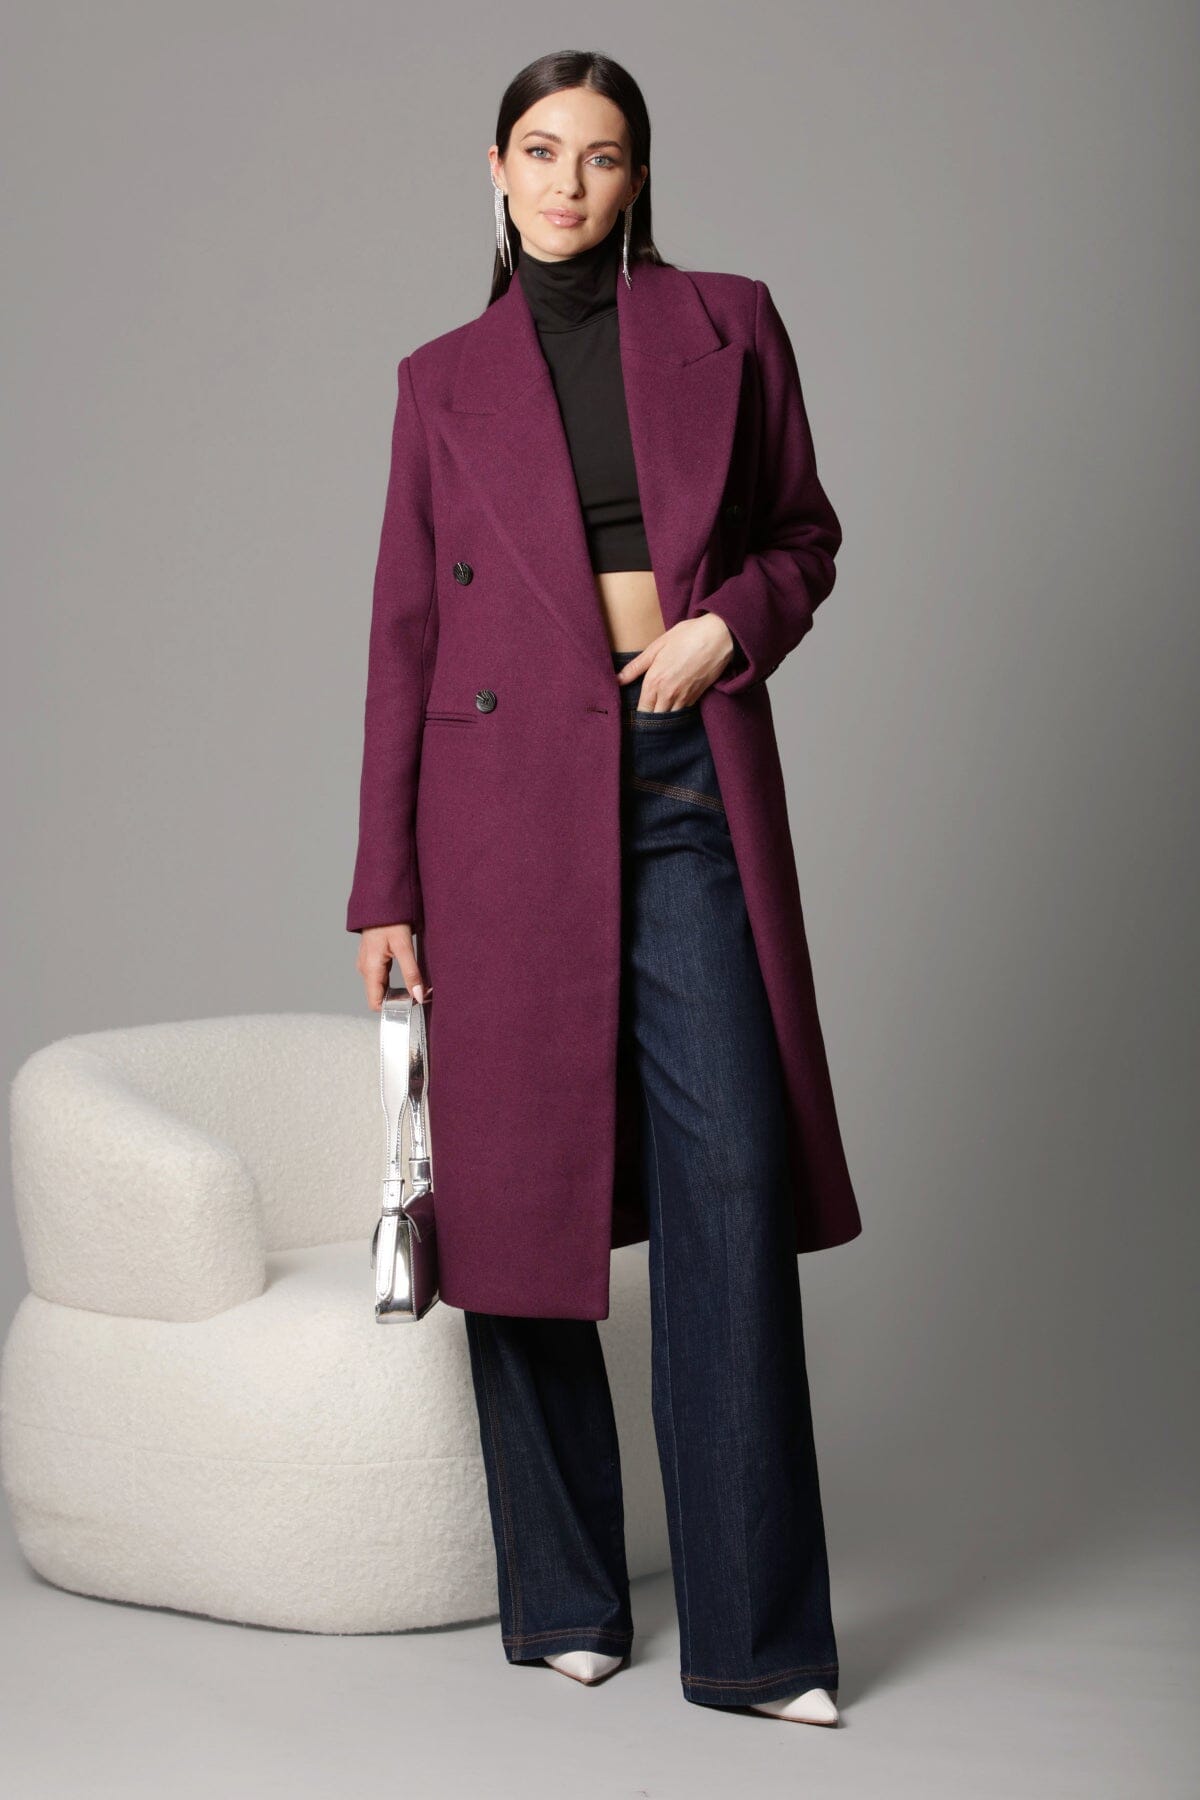 Aubergine purple tailored double-breasted long coat by Avec Les Filles Coats & Jackets